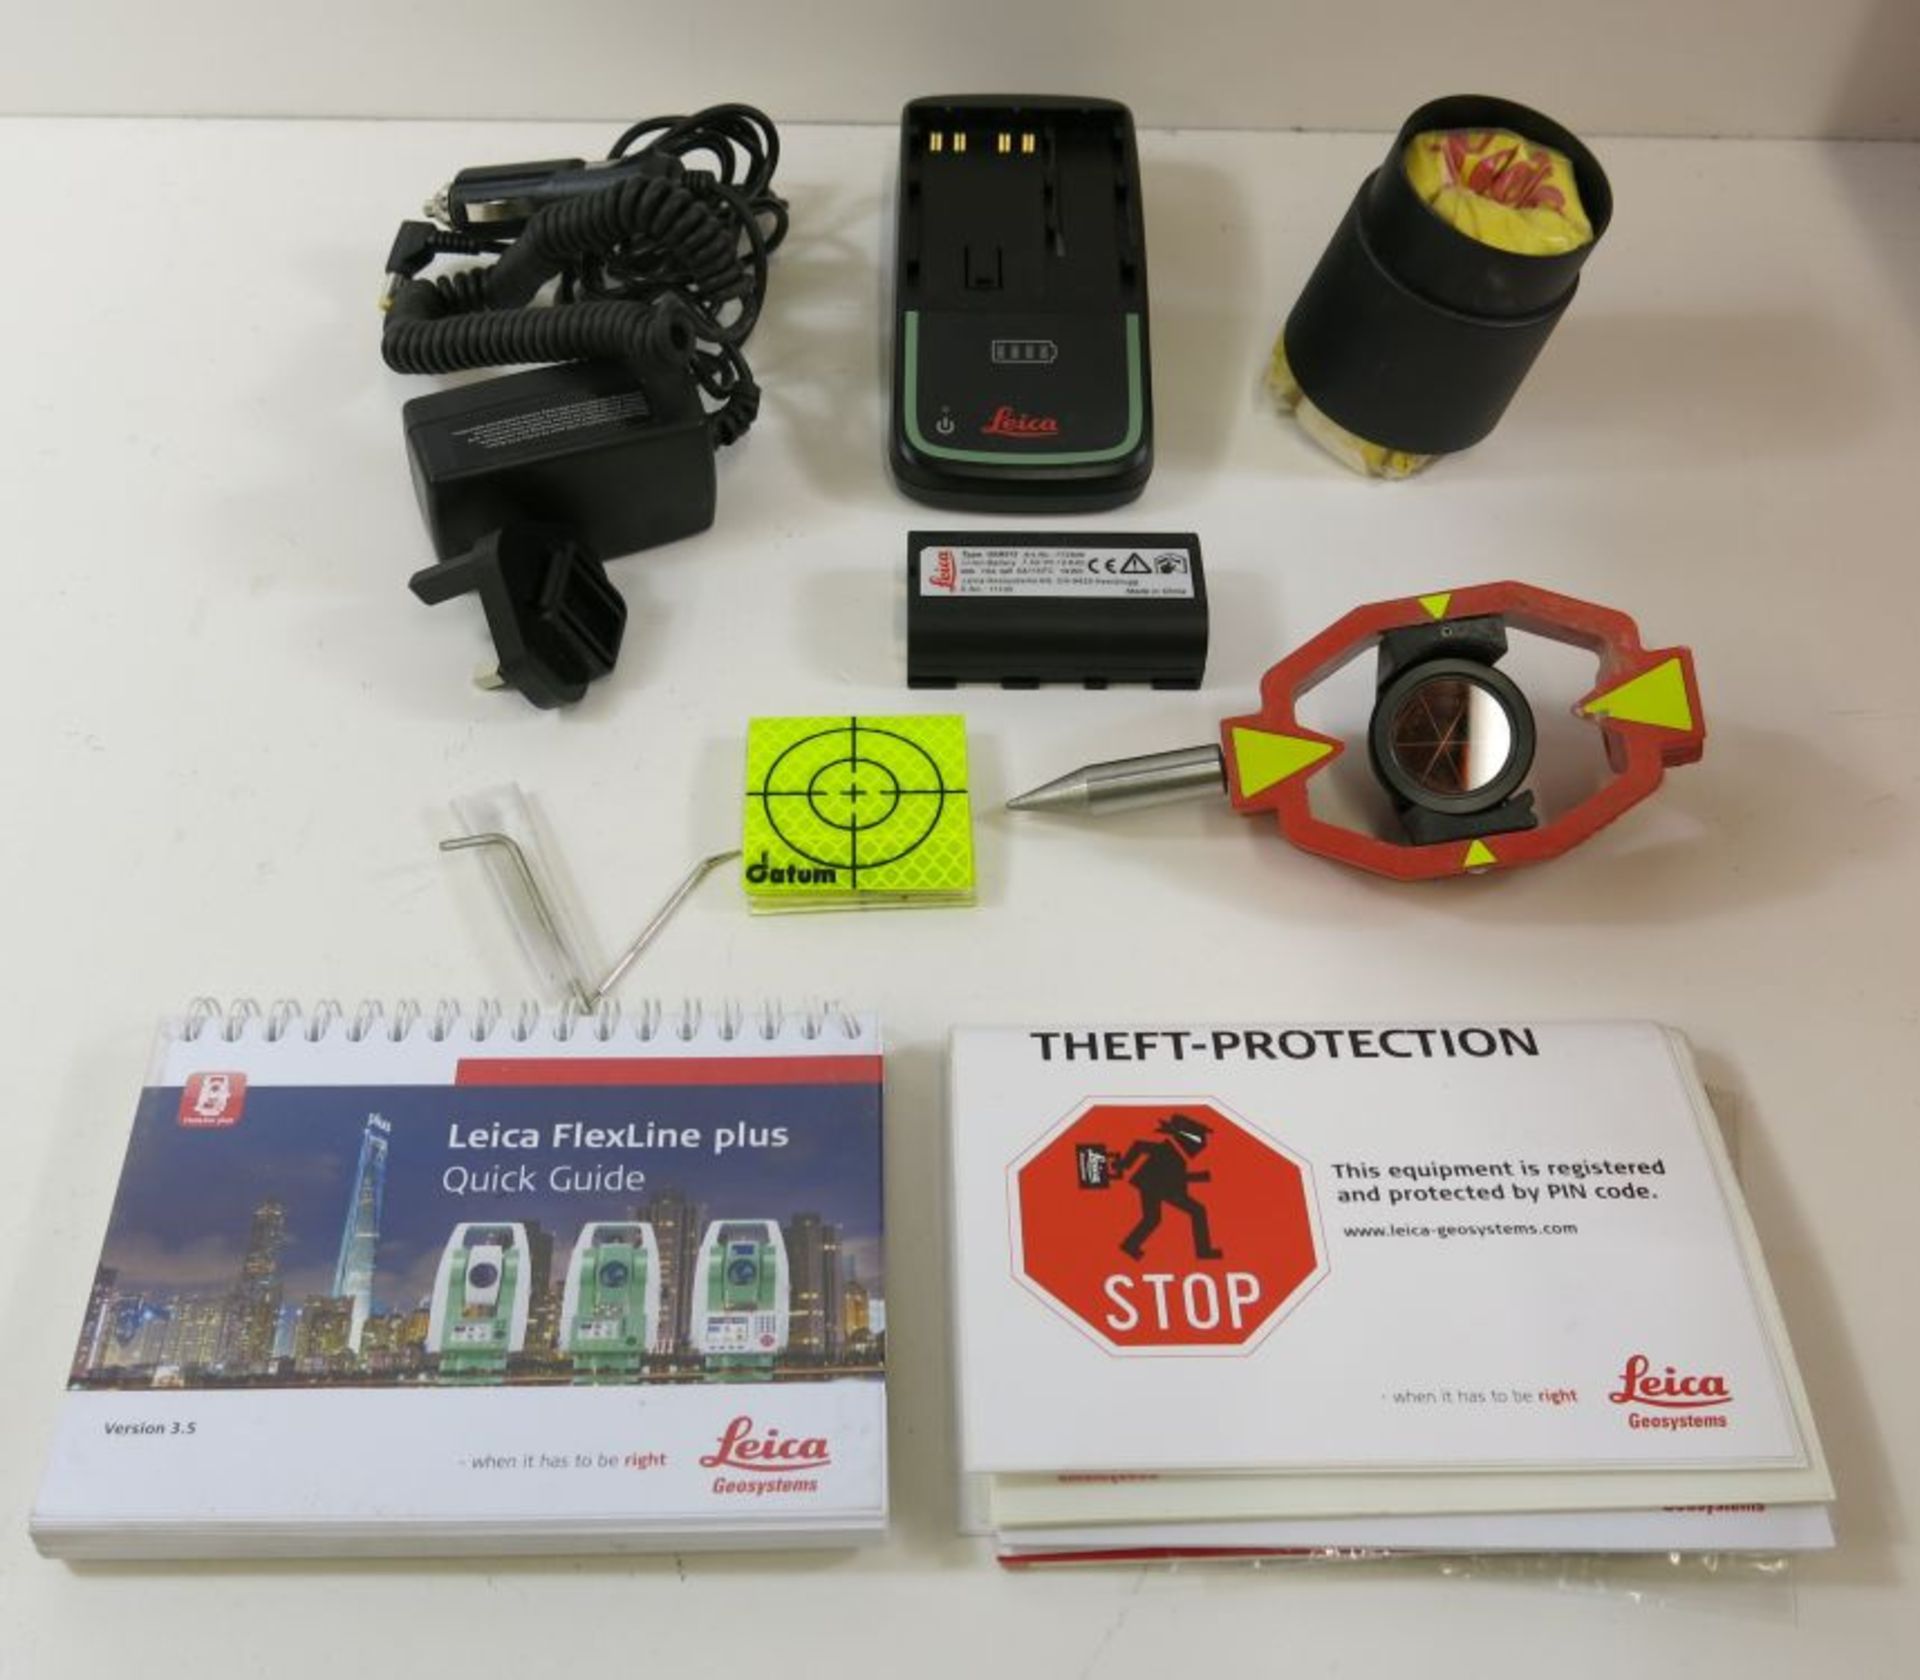 * Leica TS 06 Plus 7'' R500 Total Station Surveying Package comprising: Leica Flexfield TS 06 - Image 16 of 21